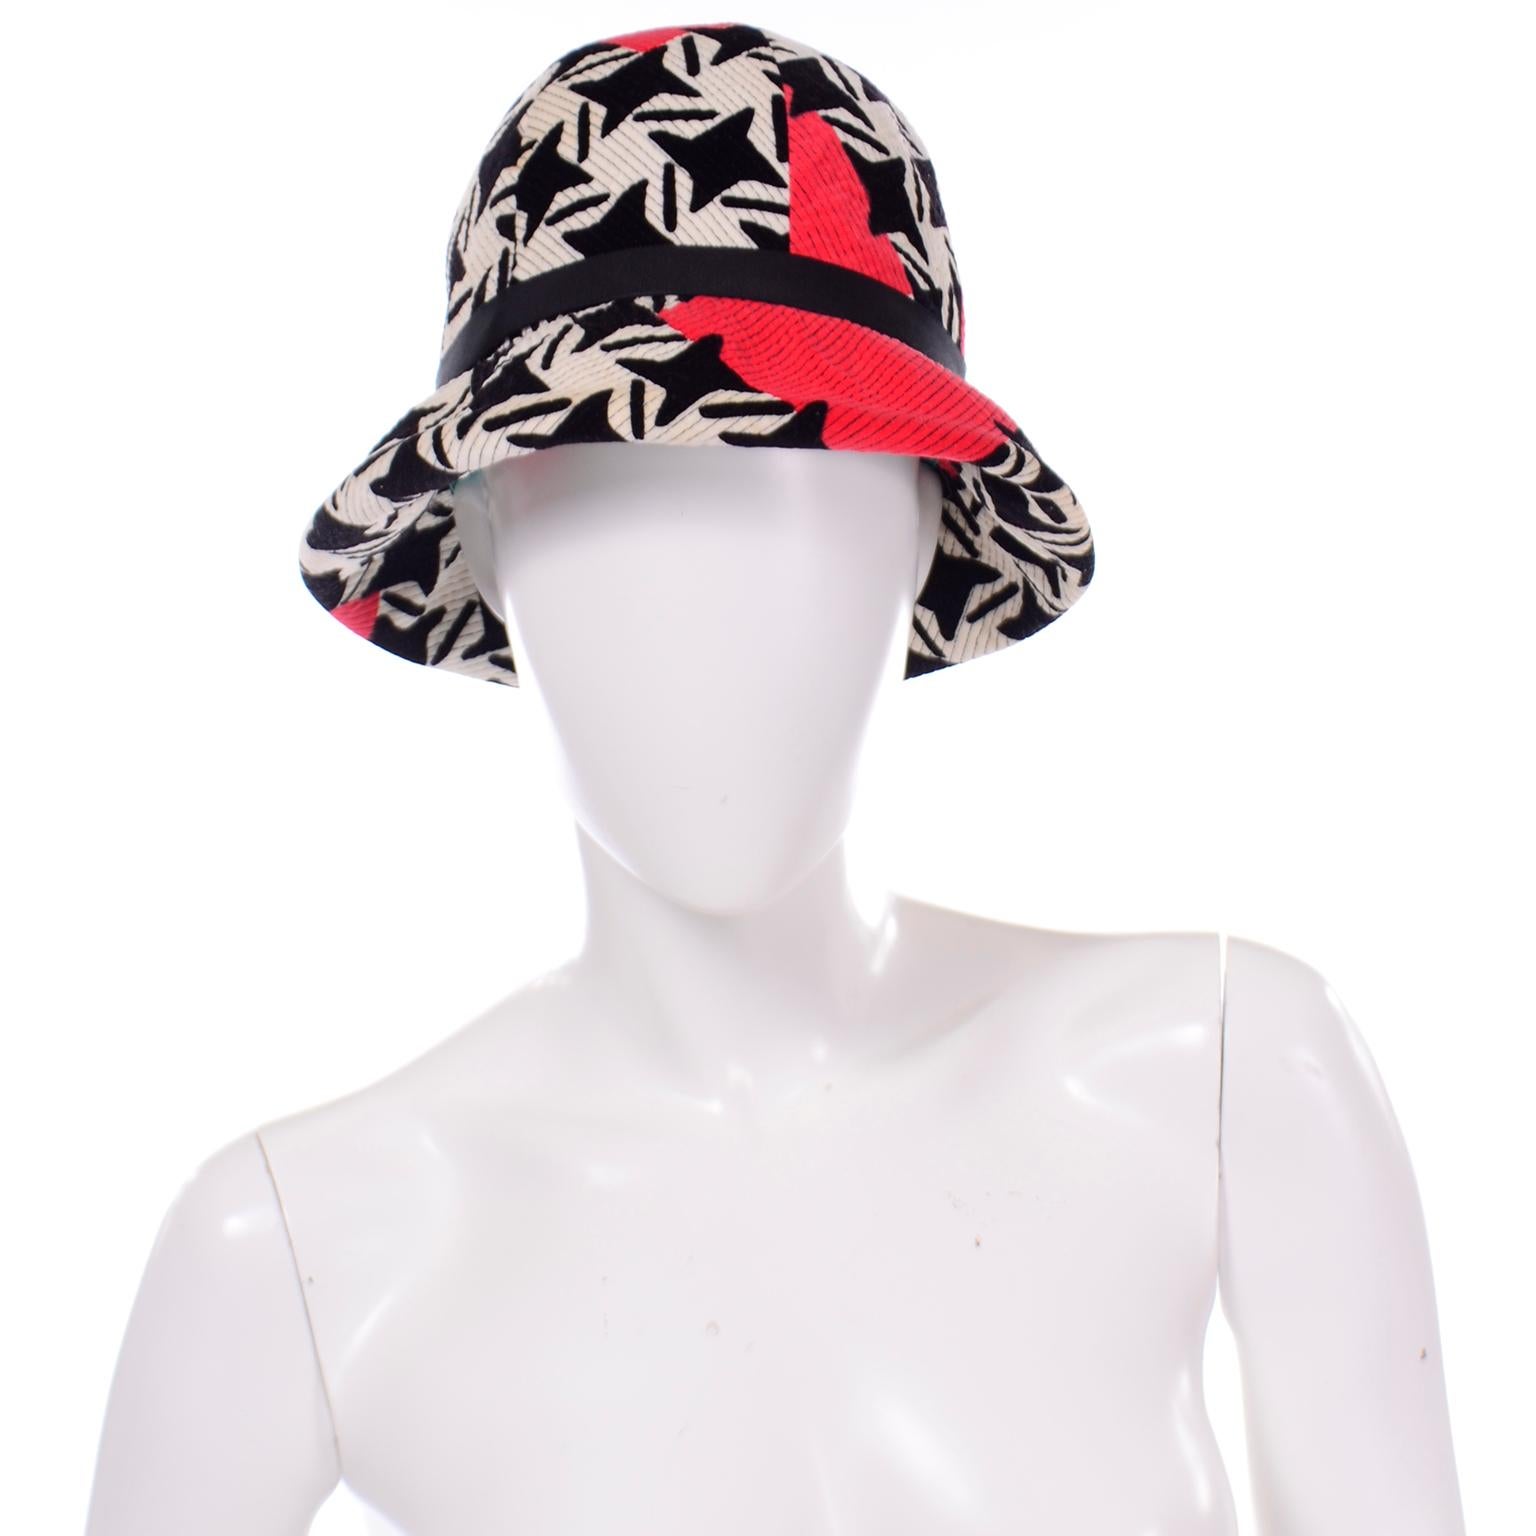 This is a rare vintage 1960's Yves Saint Laurent bucket hat in a bold, graphic print. The hat is made of velvet in a black and white modified houndstooth or pinwheel pattern print with red geometric abstract shapes and black top stitching. There is